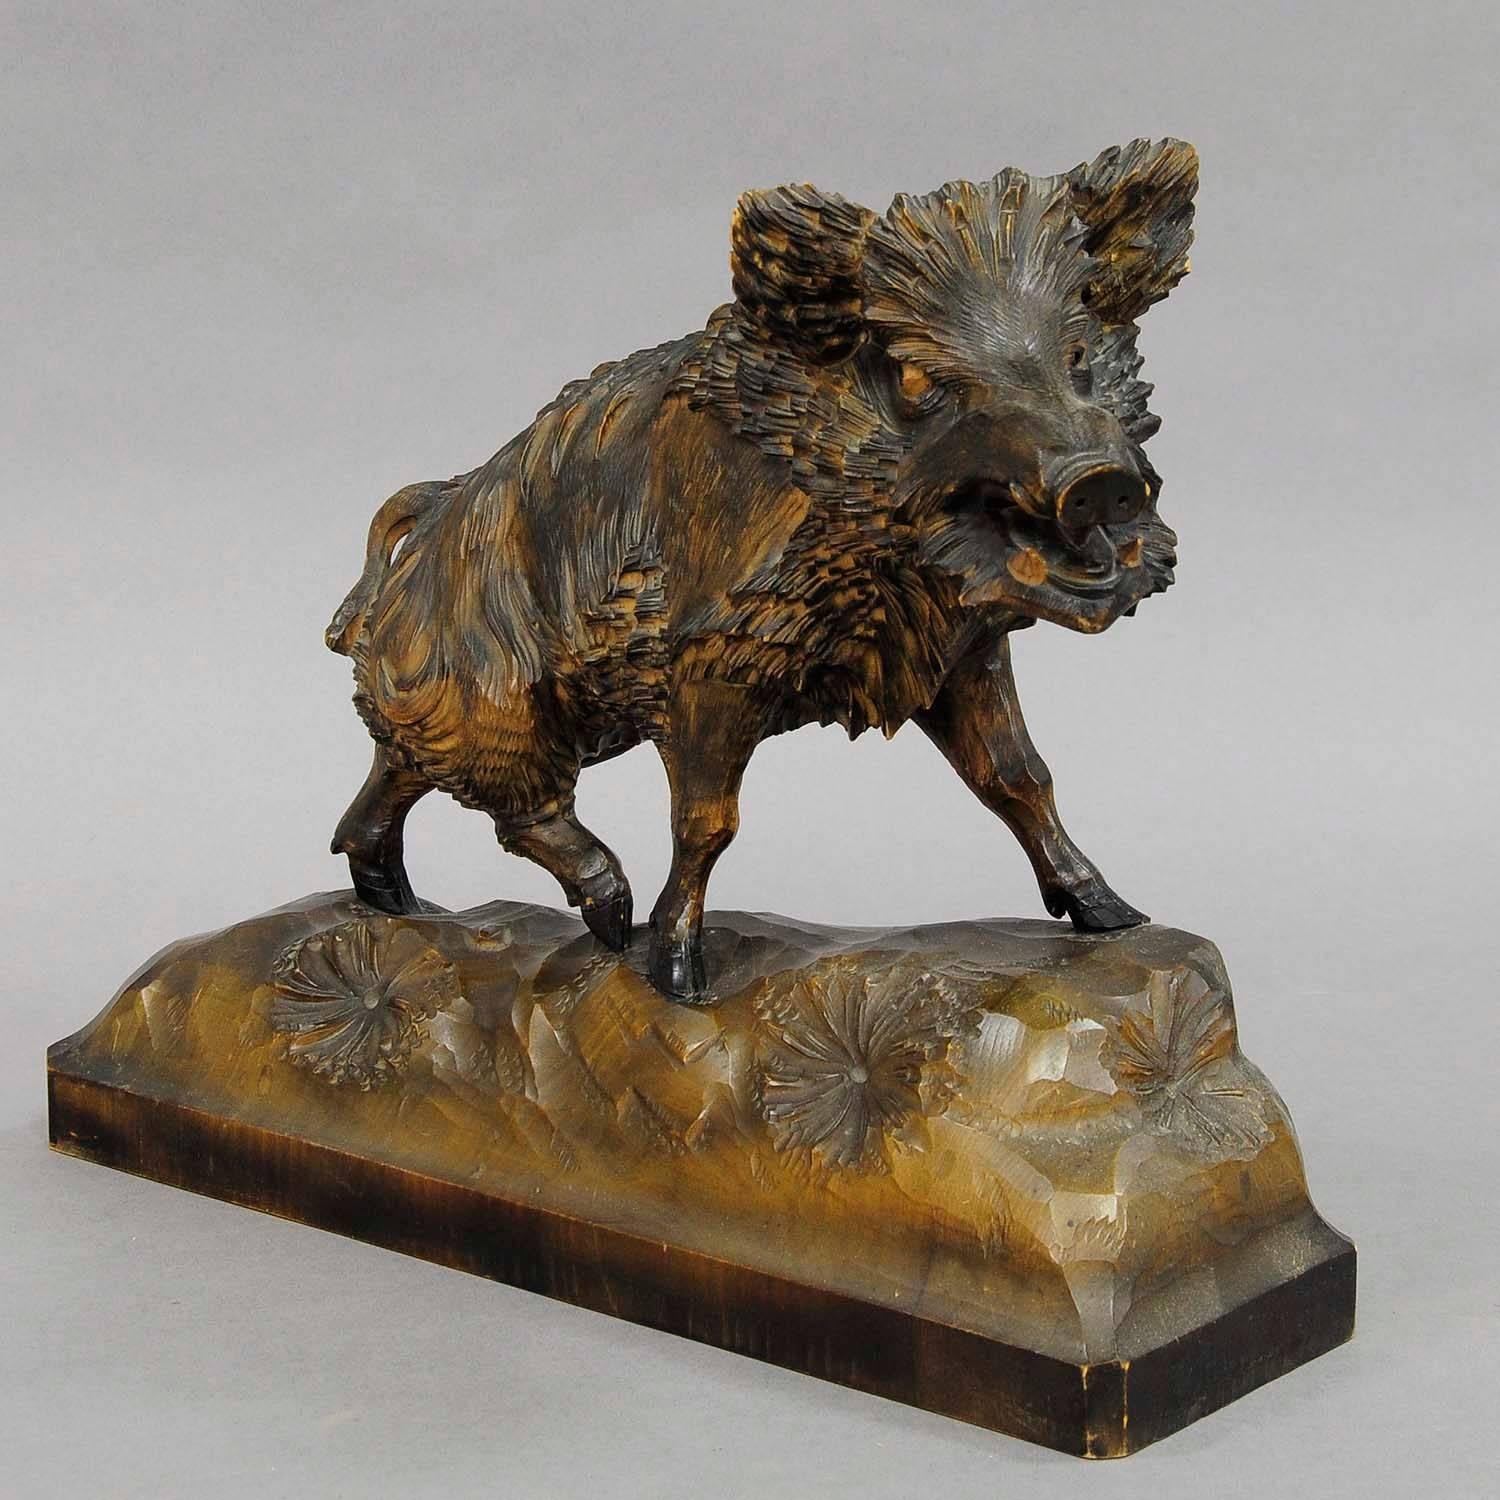 A hand-carved wood sculpture of a wild boar. Very detailed natural carving. Black Forest, circa 1950.